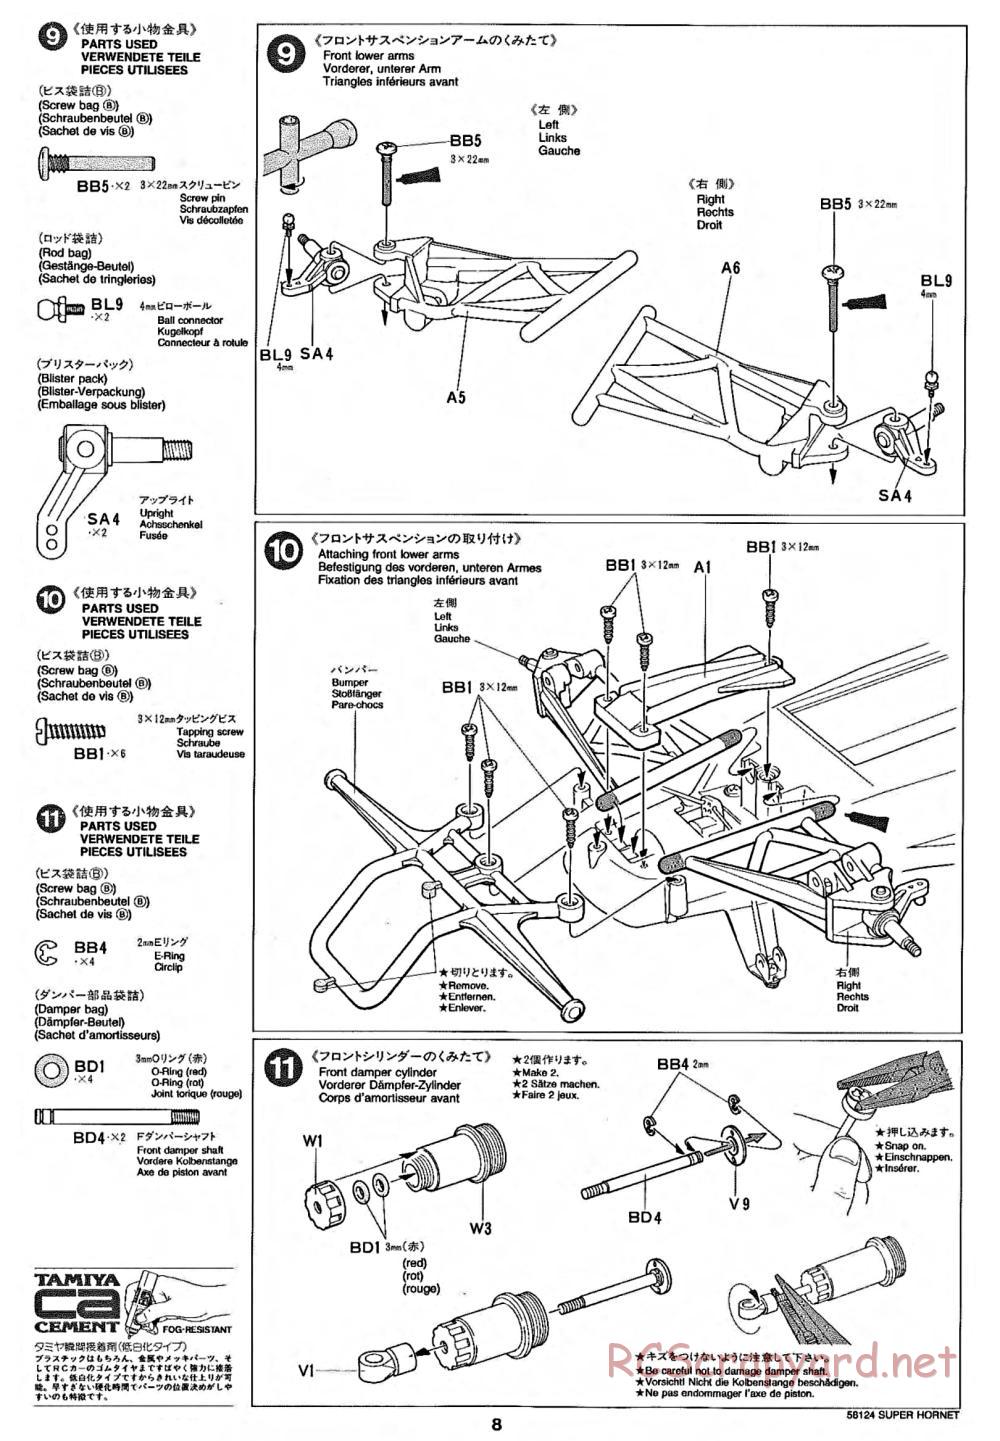 Tamiya - Super Hornet Chassis - Manual - Page 8